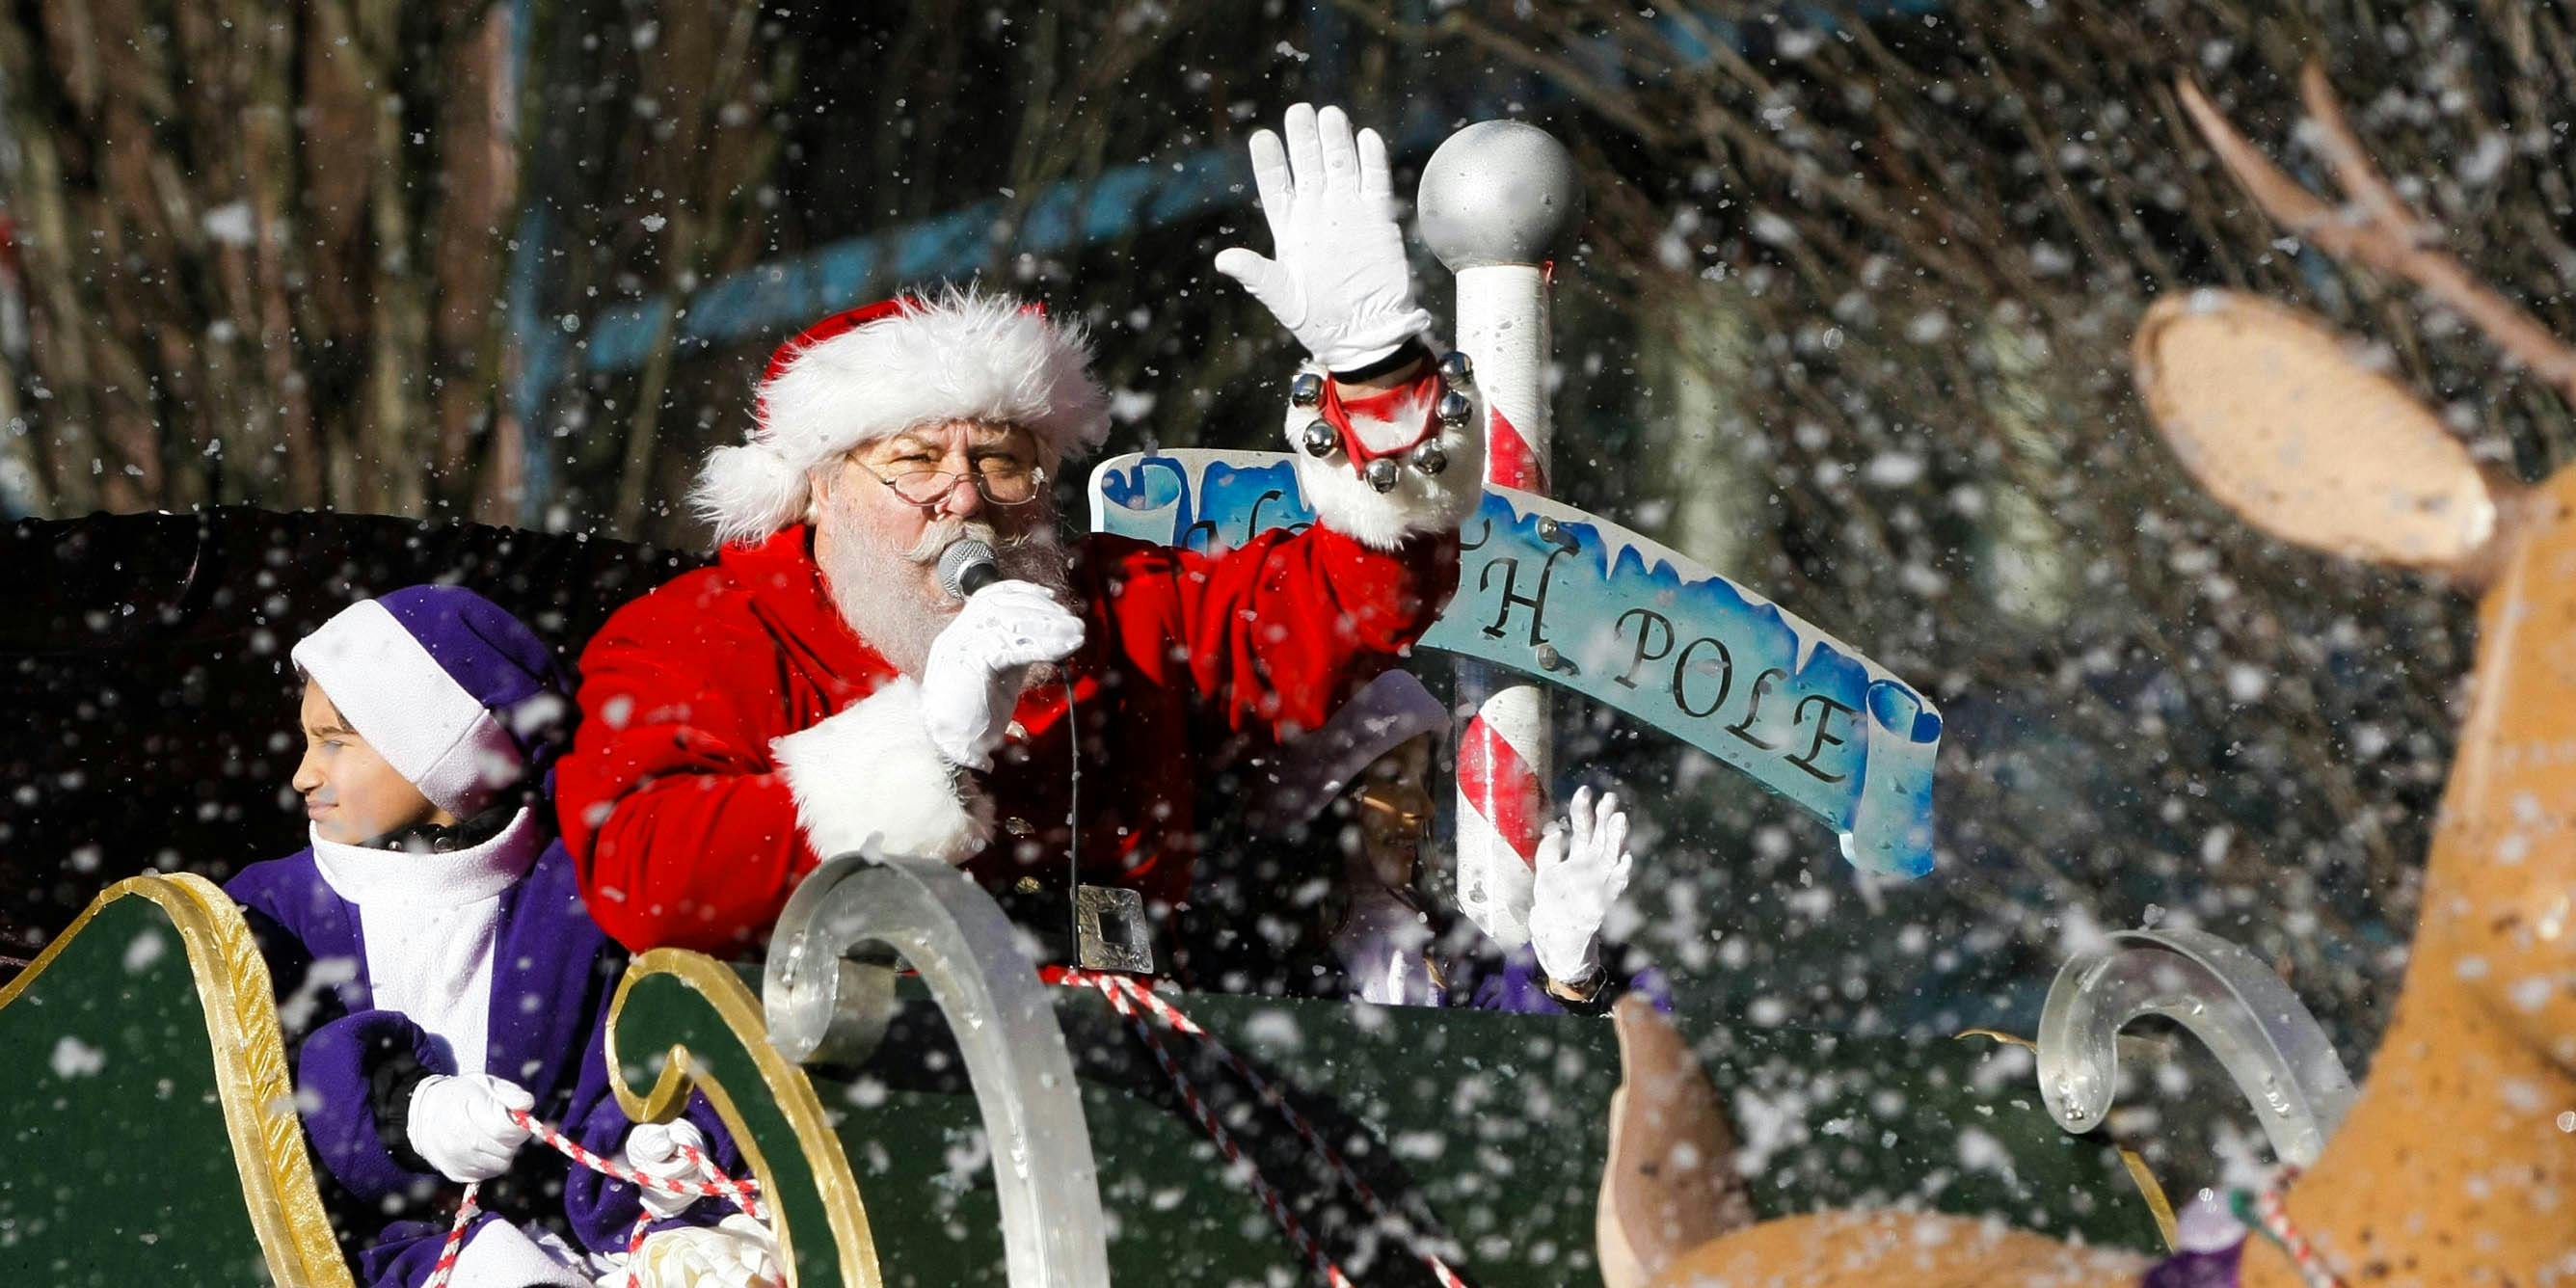 Santa Claus waves at the crowd from his float during the annual Vancouver Santa Claus Parade.